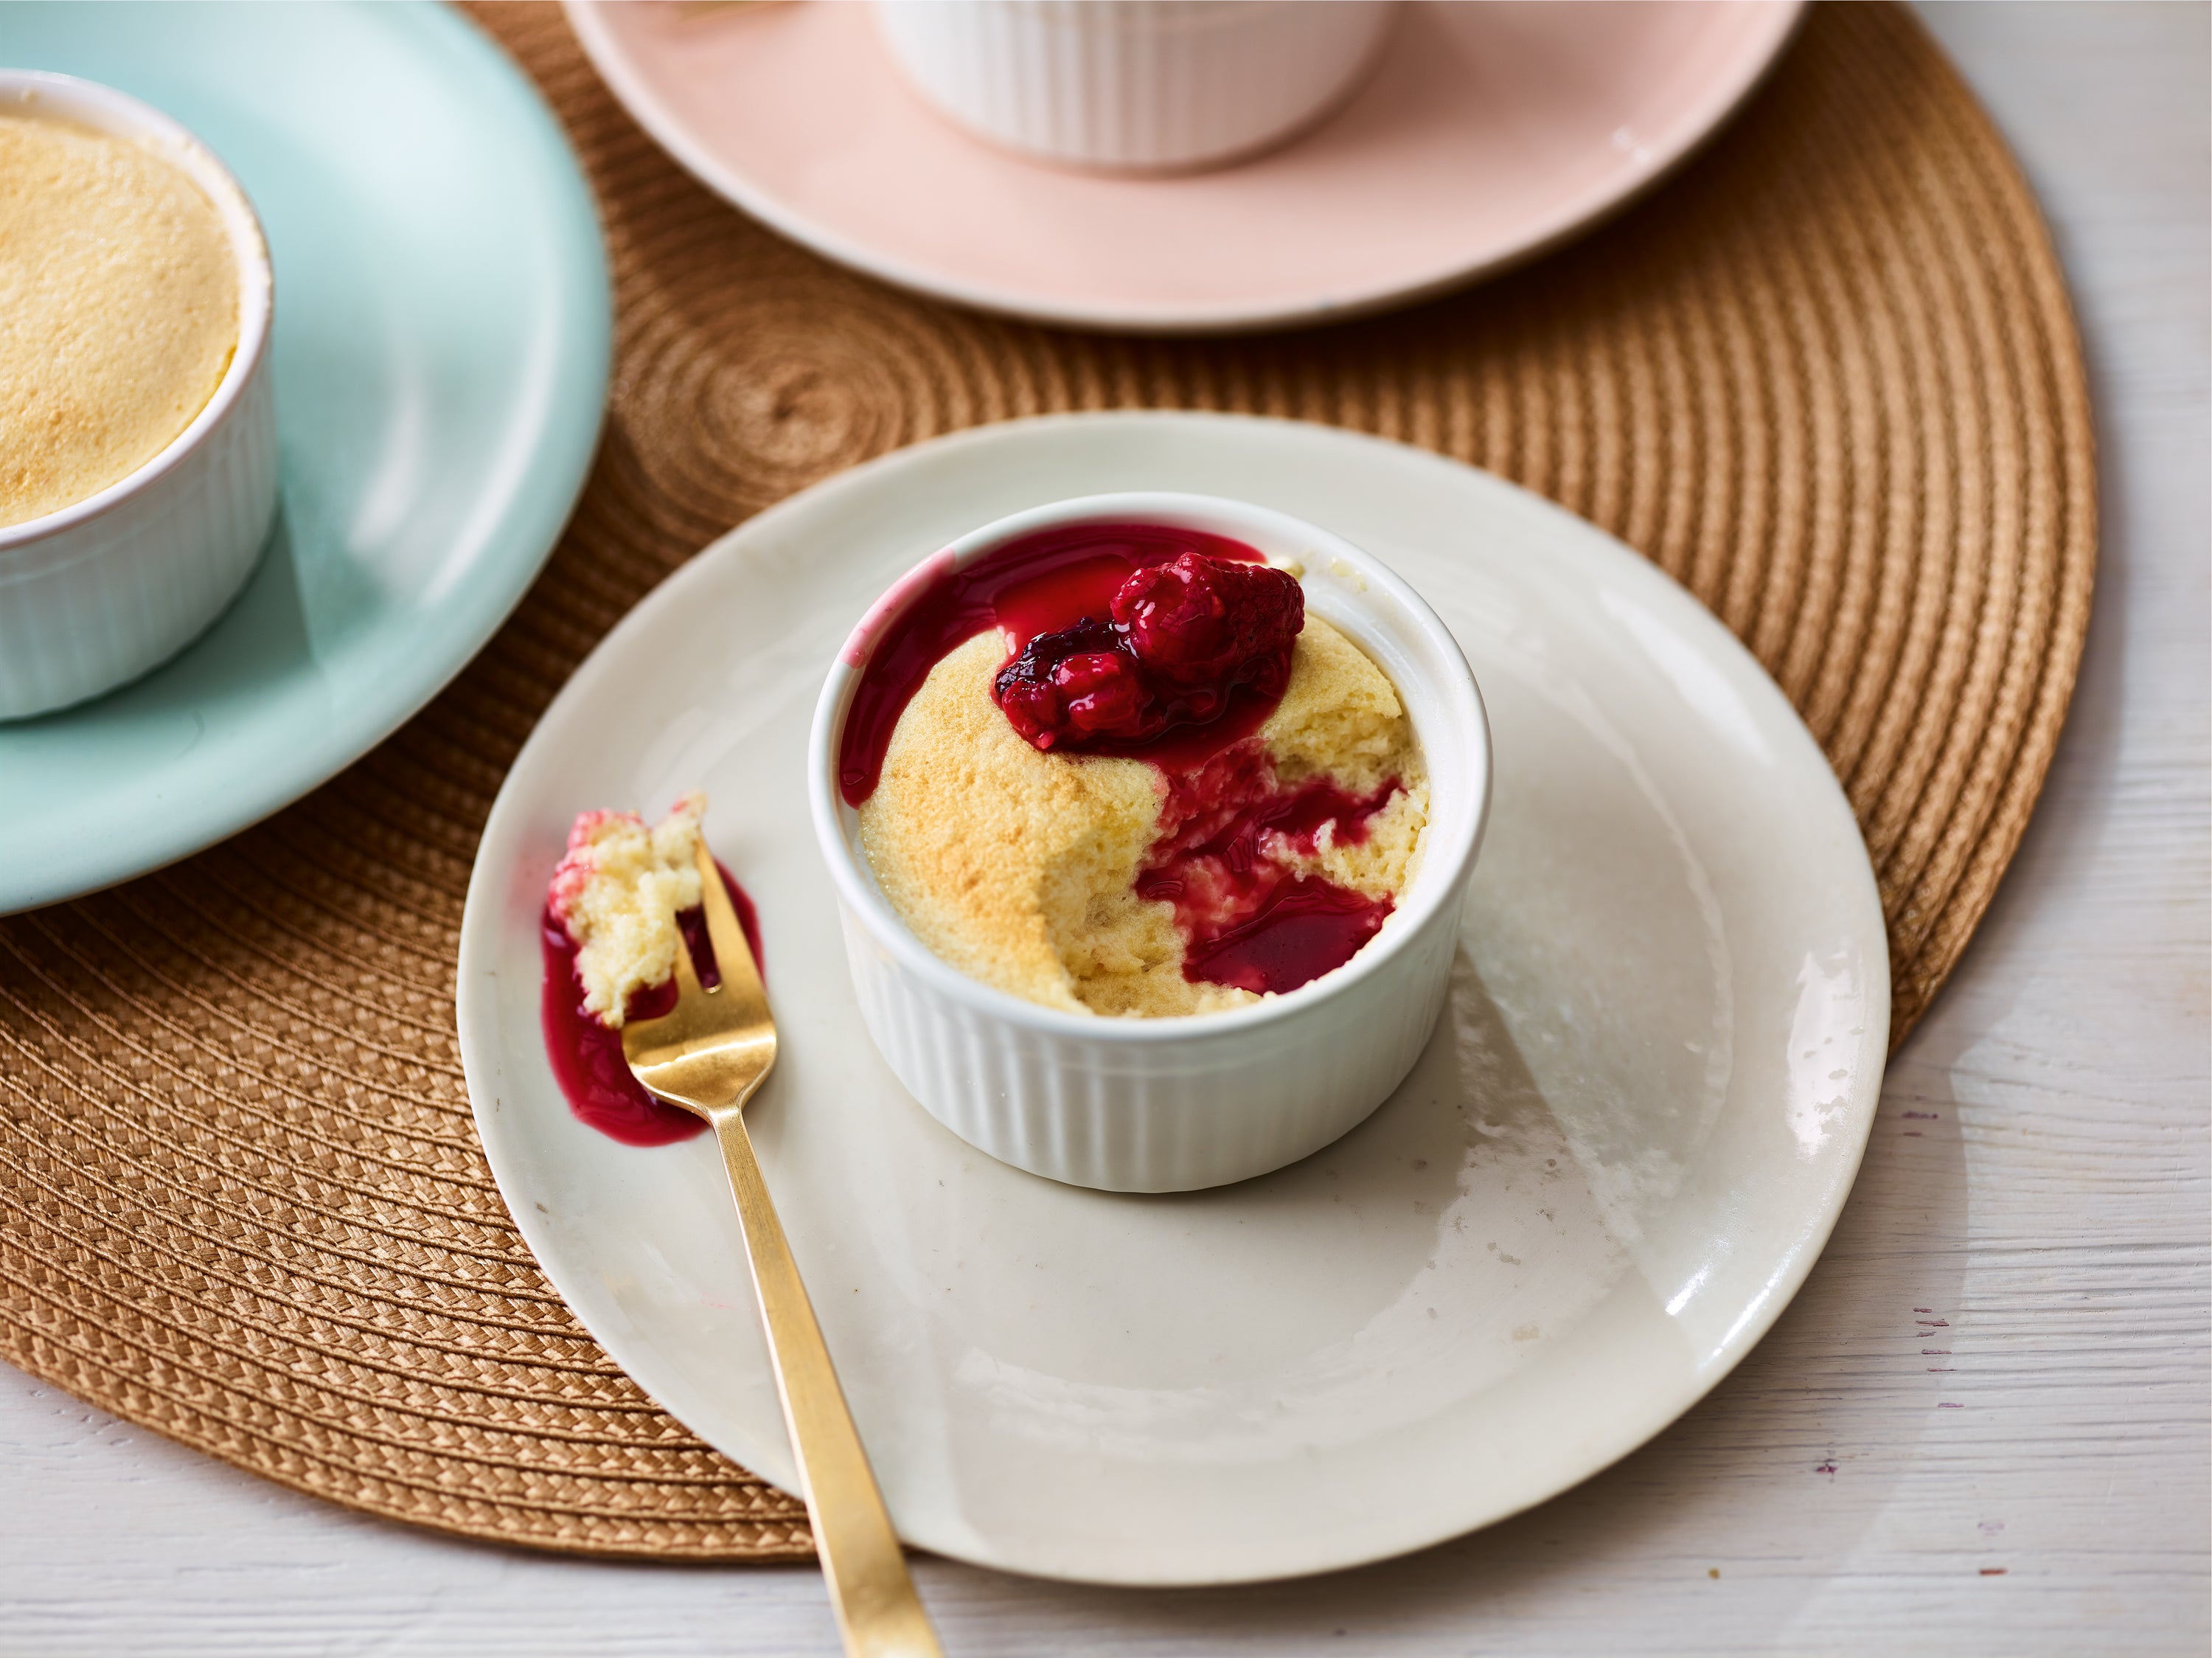 Individual sweet souffles with fruity sauce make for a decadent dessert